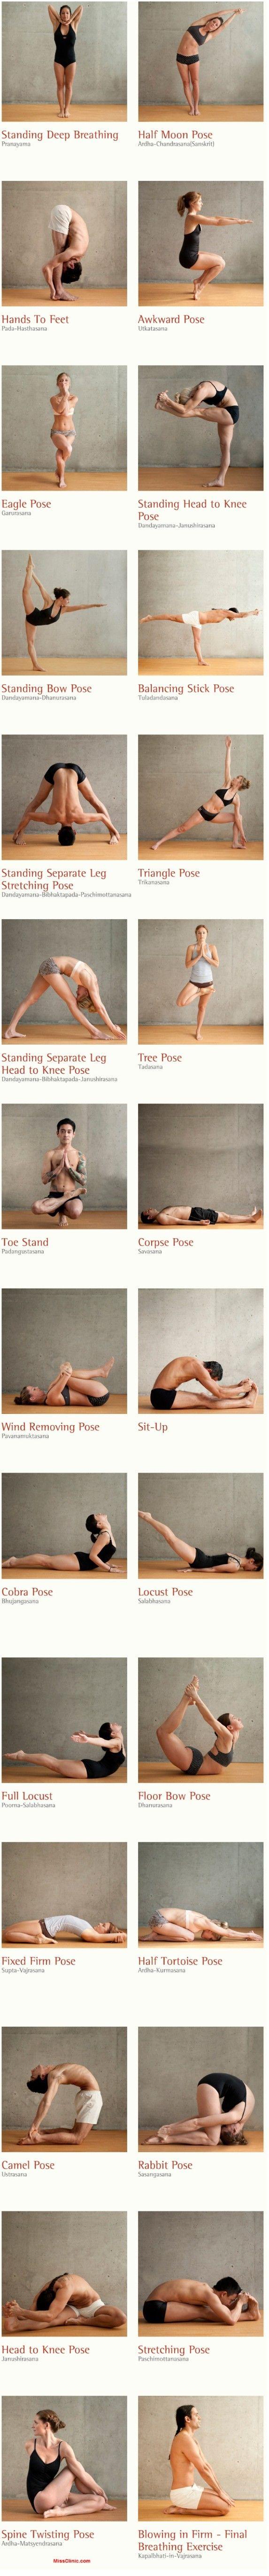 Wedding - 23 Yoga Styles Every Yoga Lover Should Know